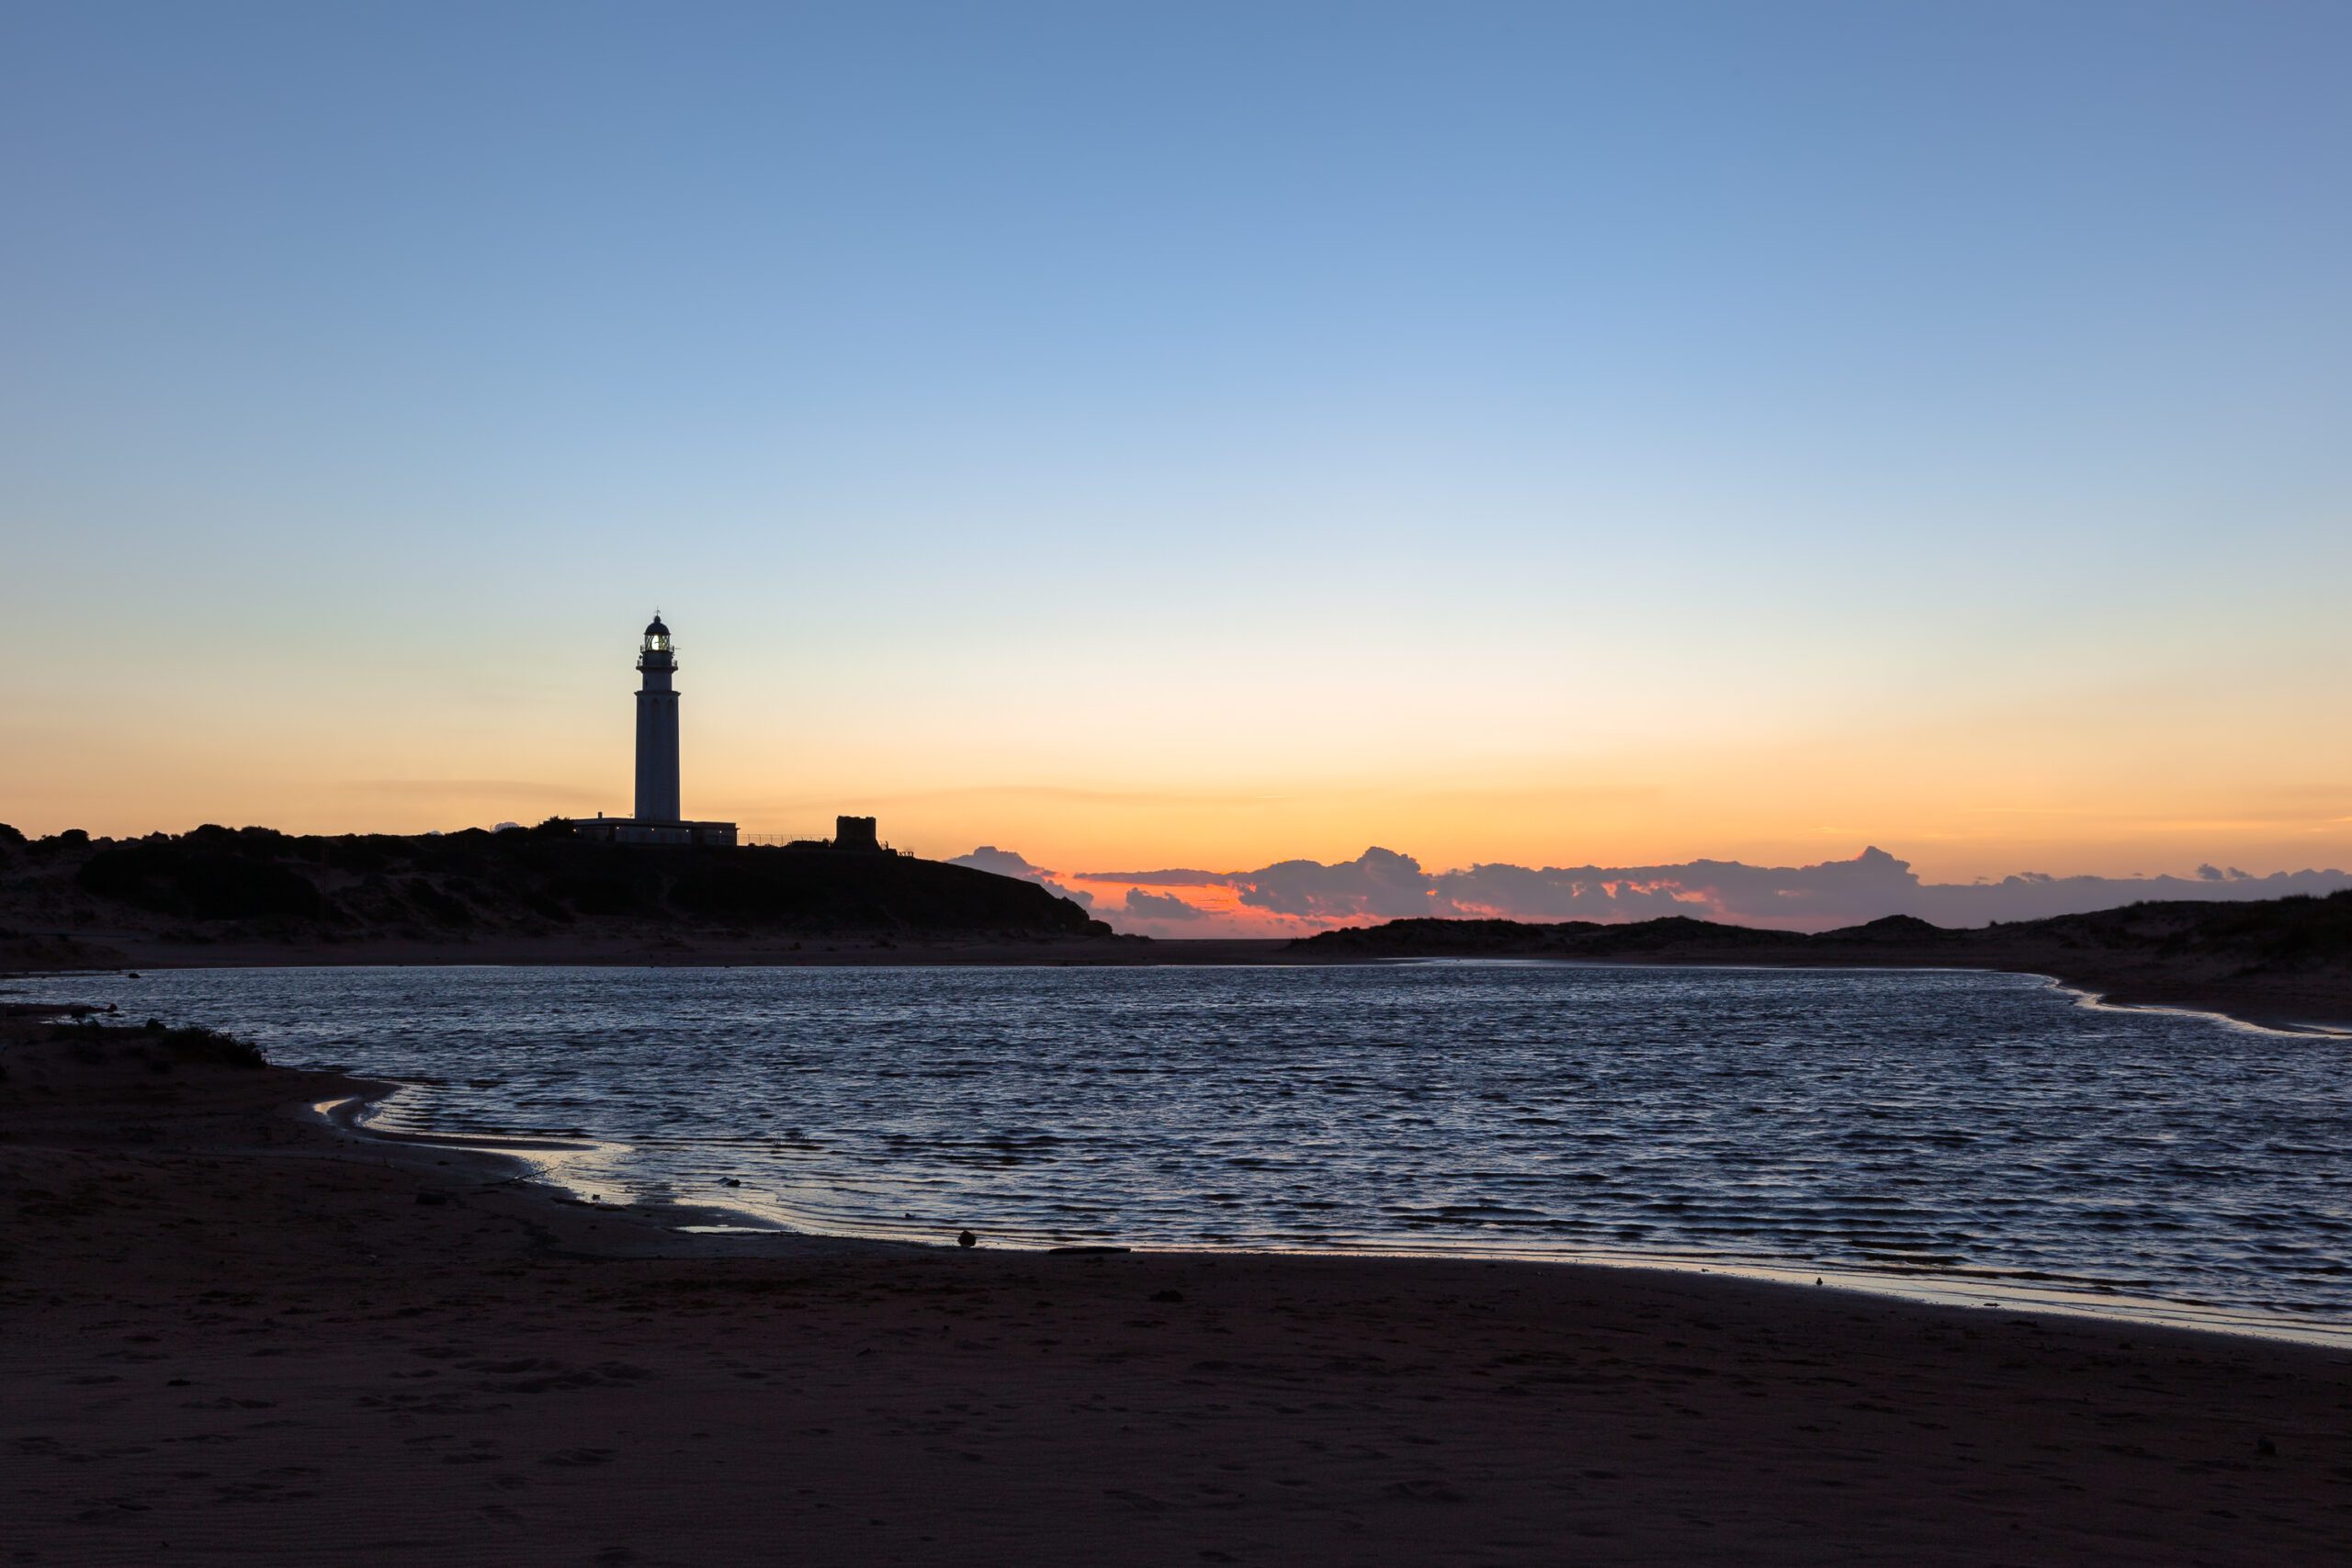 A captivating depiction of Cape Trafalgar’s lighthouse, elegantly silhouetted against the canvas of a sunset sky,